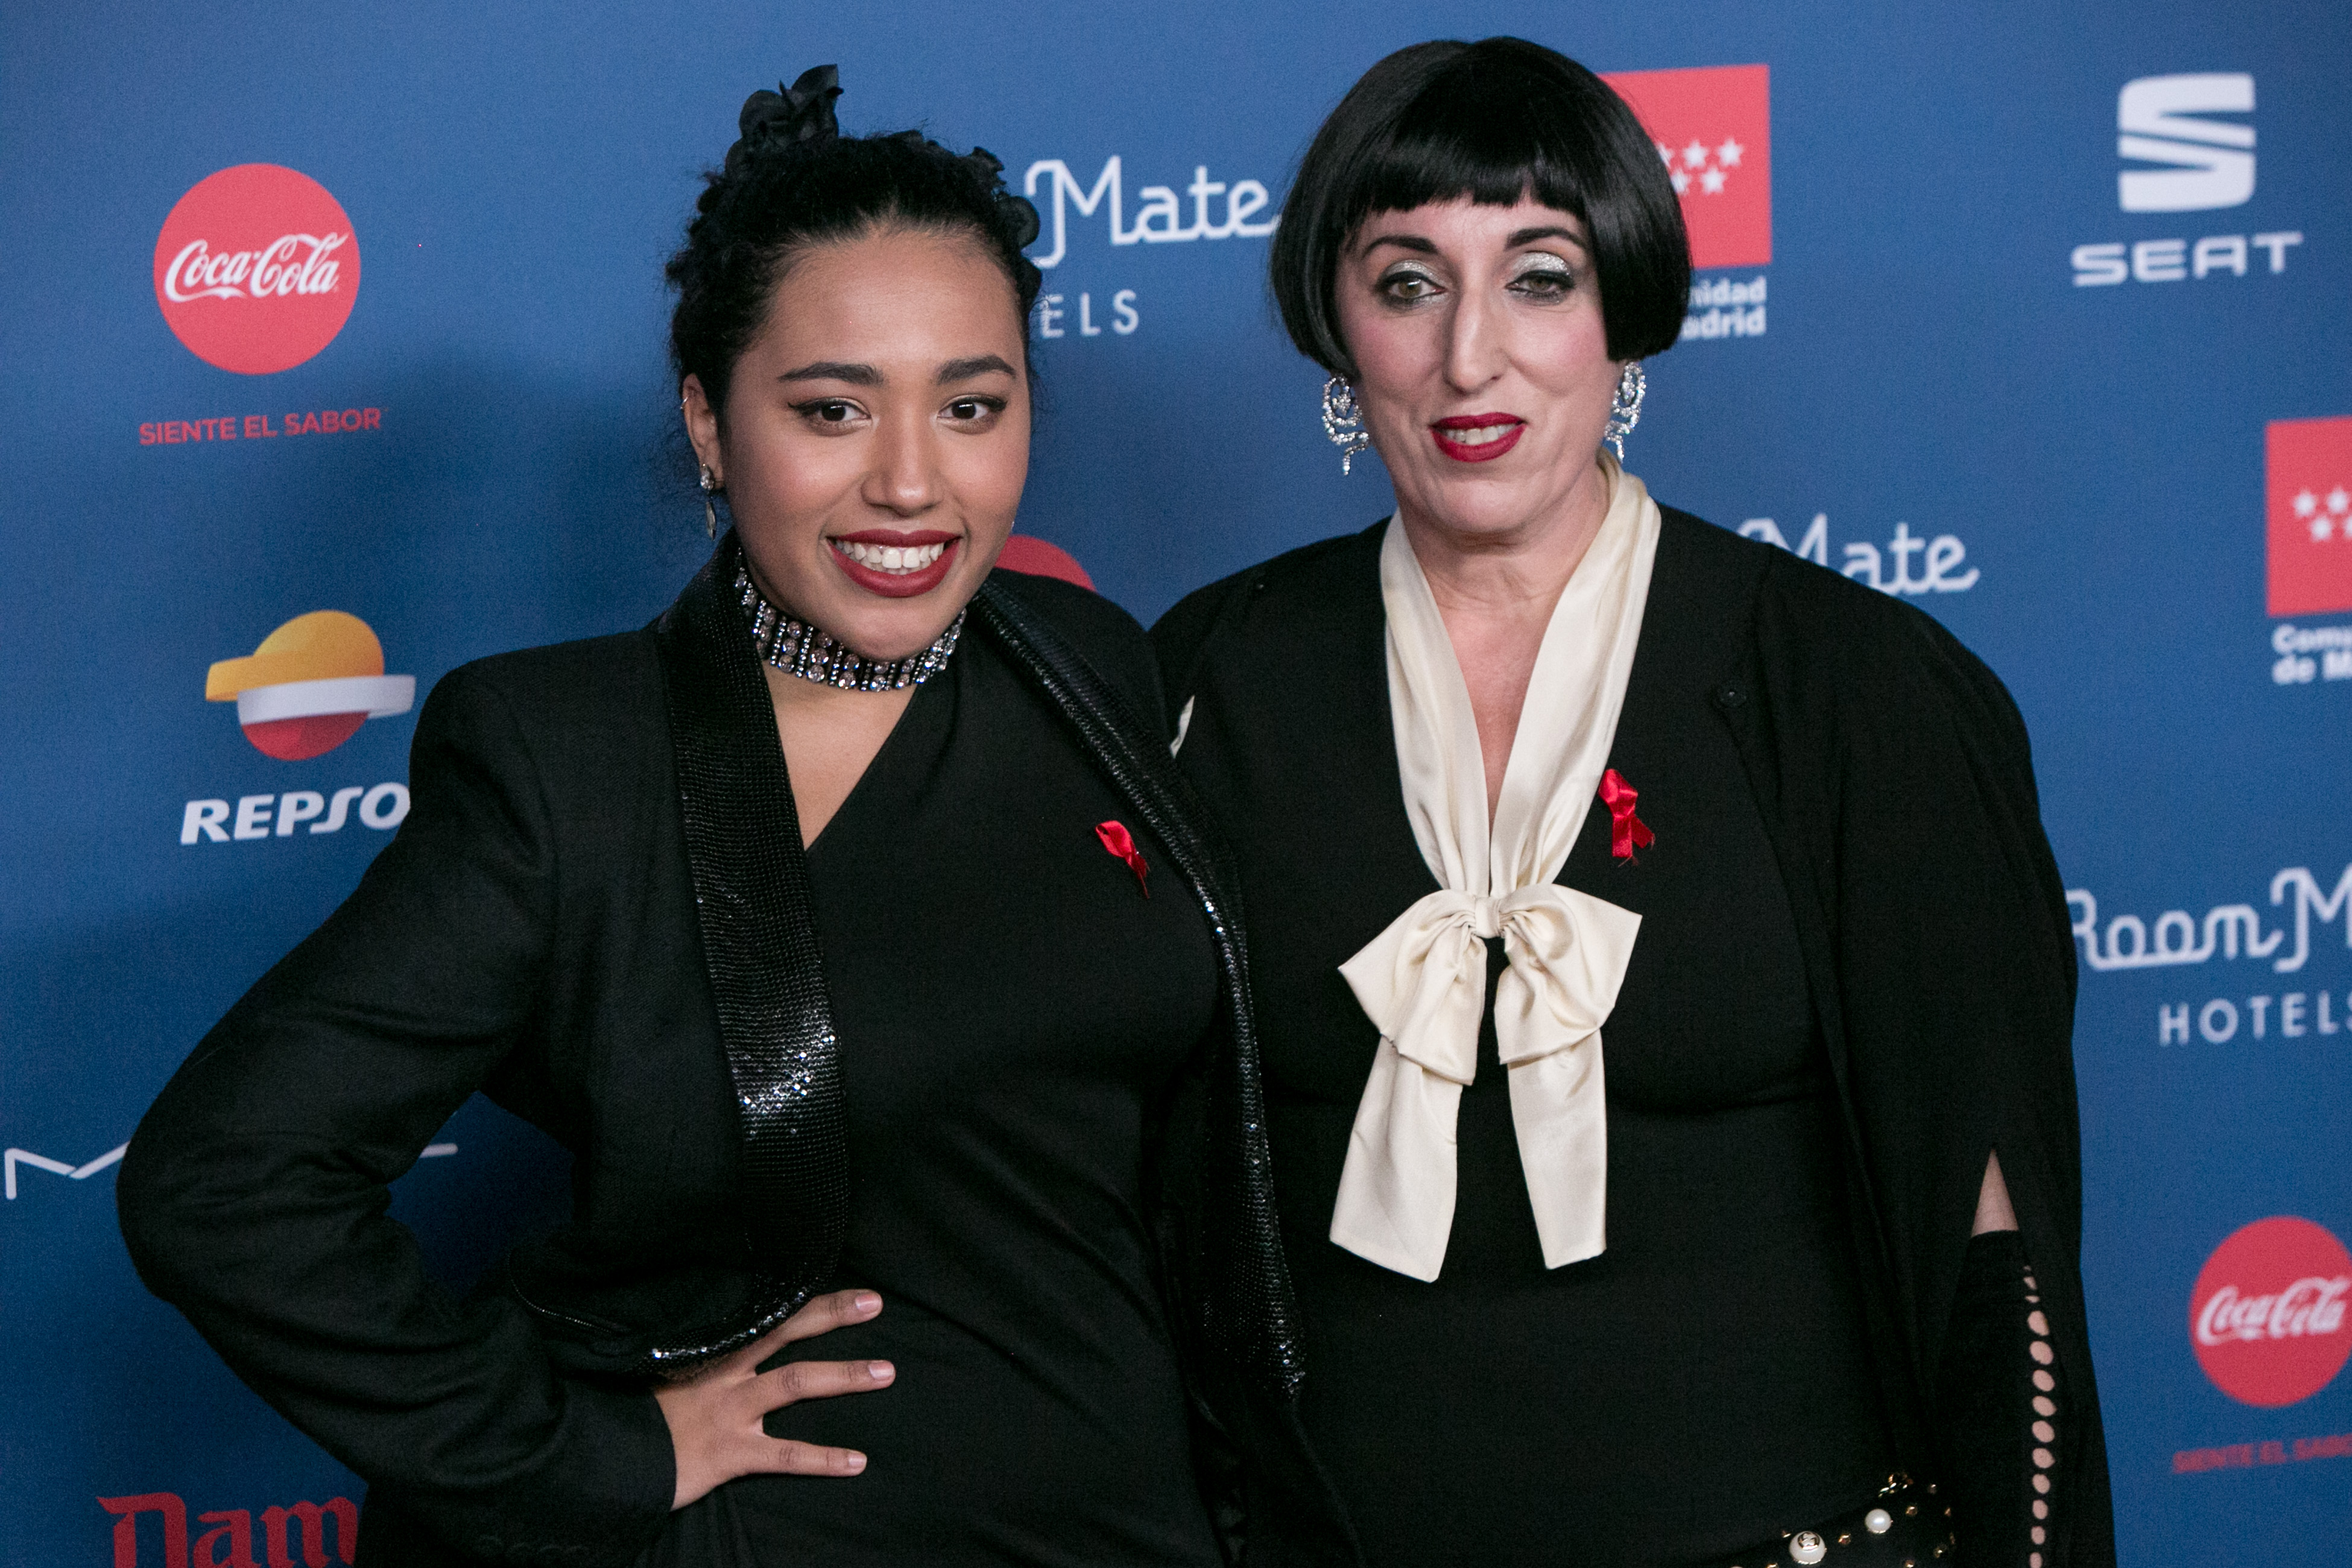 Luna Garcia and Rossy de Palma at the "Gala Sida" on November 21, 2016, in Madrid, Spain | Source: Getty Images